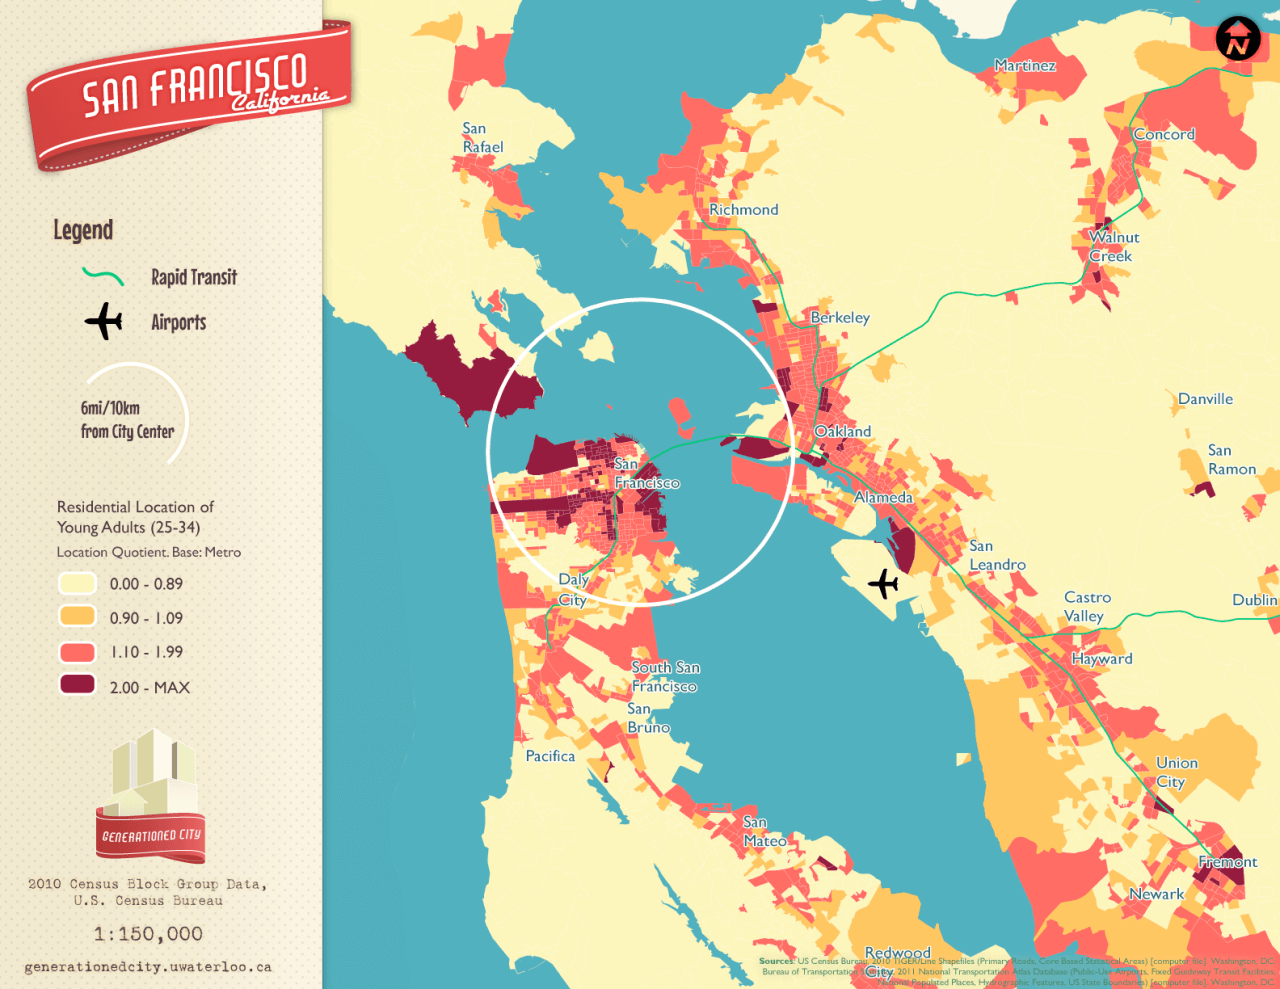 Residential location of young adults in San Francisco.